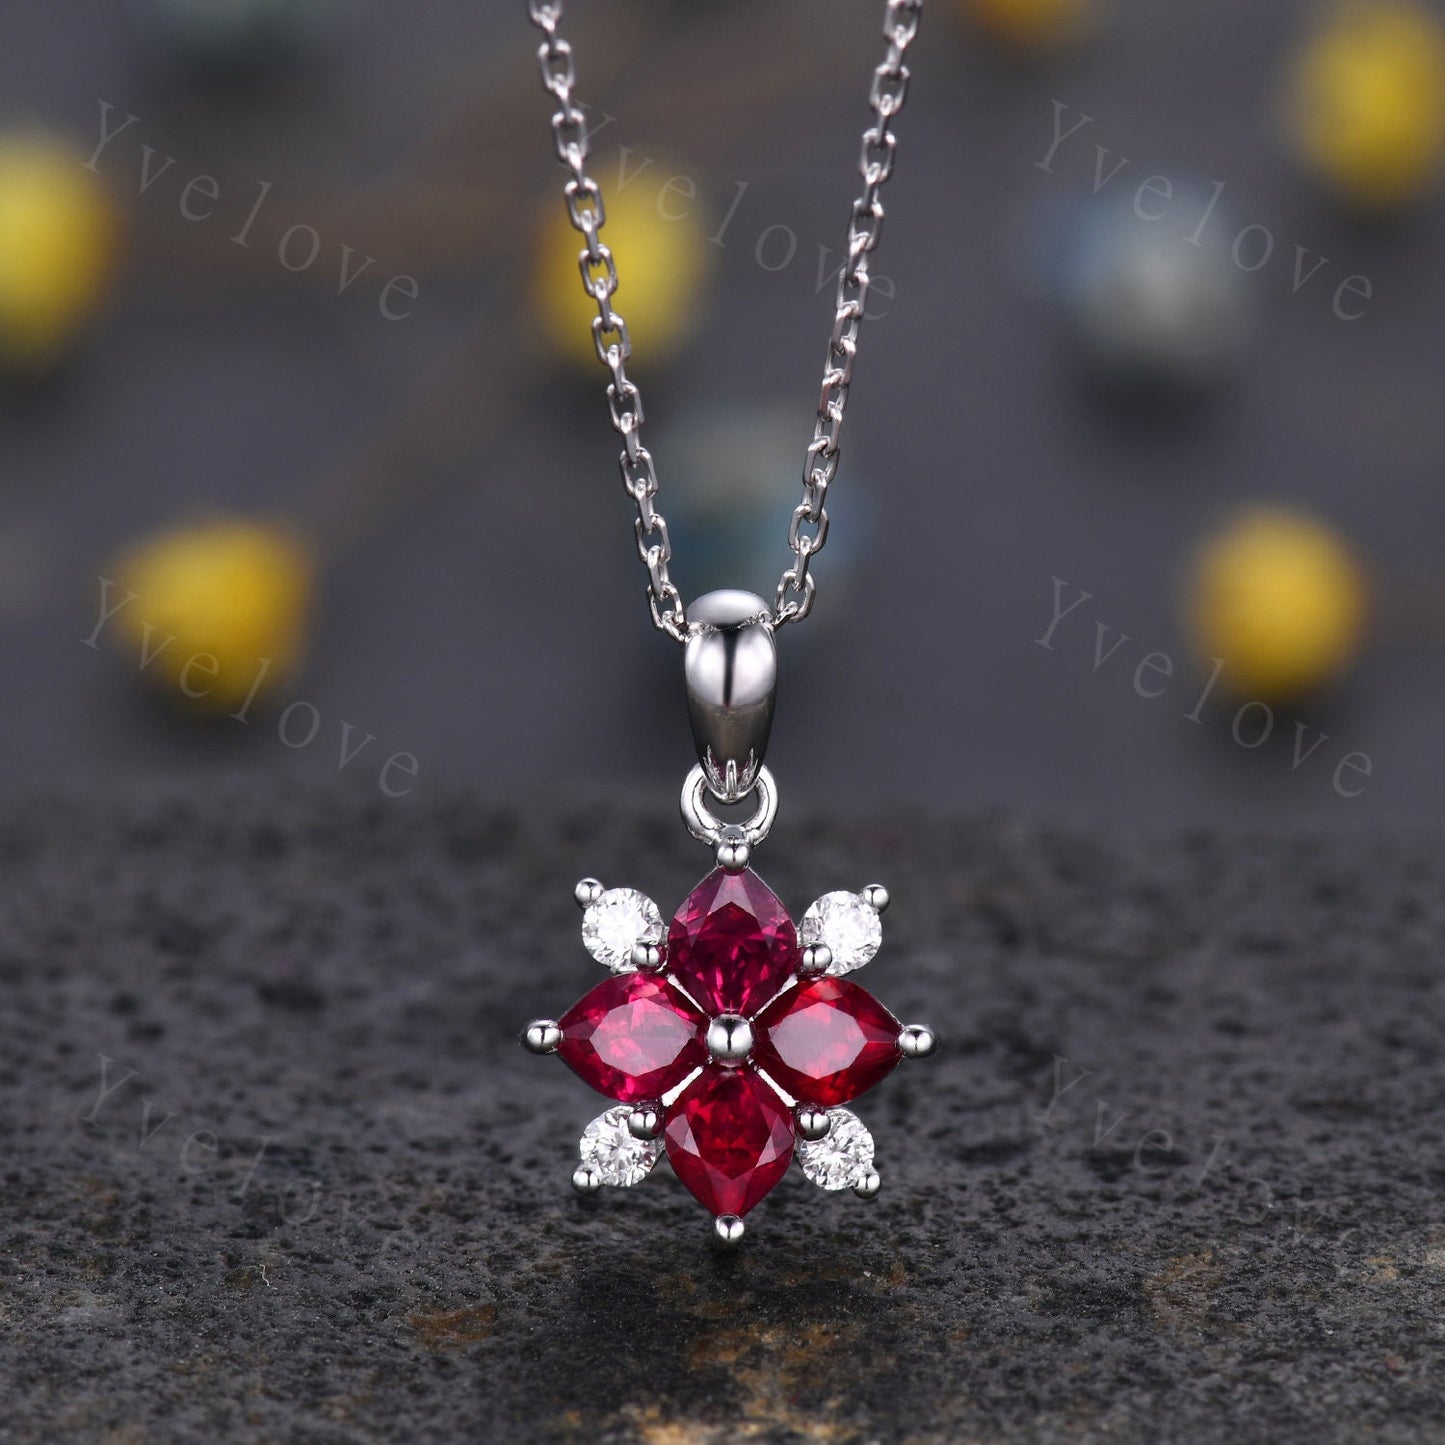 Vintage Natural Red Ruby Diamond Necklace,Pink Gems Pendant Floral Diamond Jewelry Delicate Dainty Necklace Gift For Women,14k White Gold